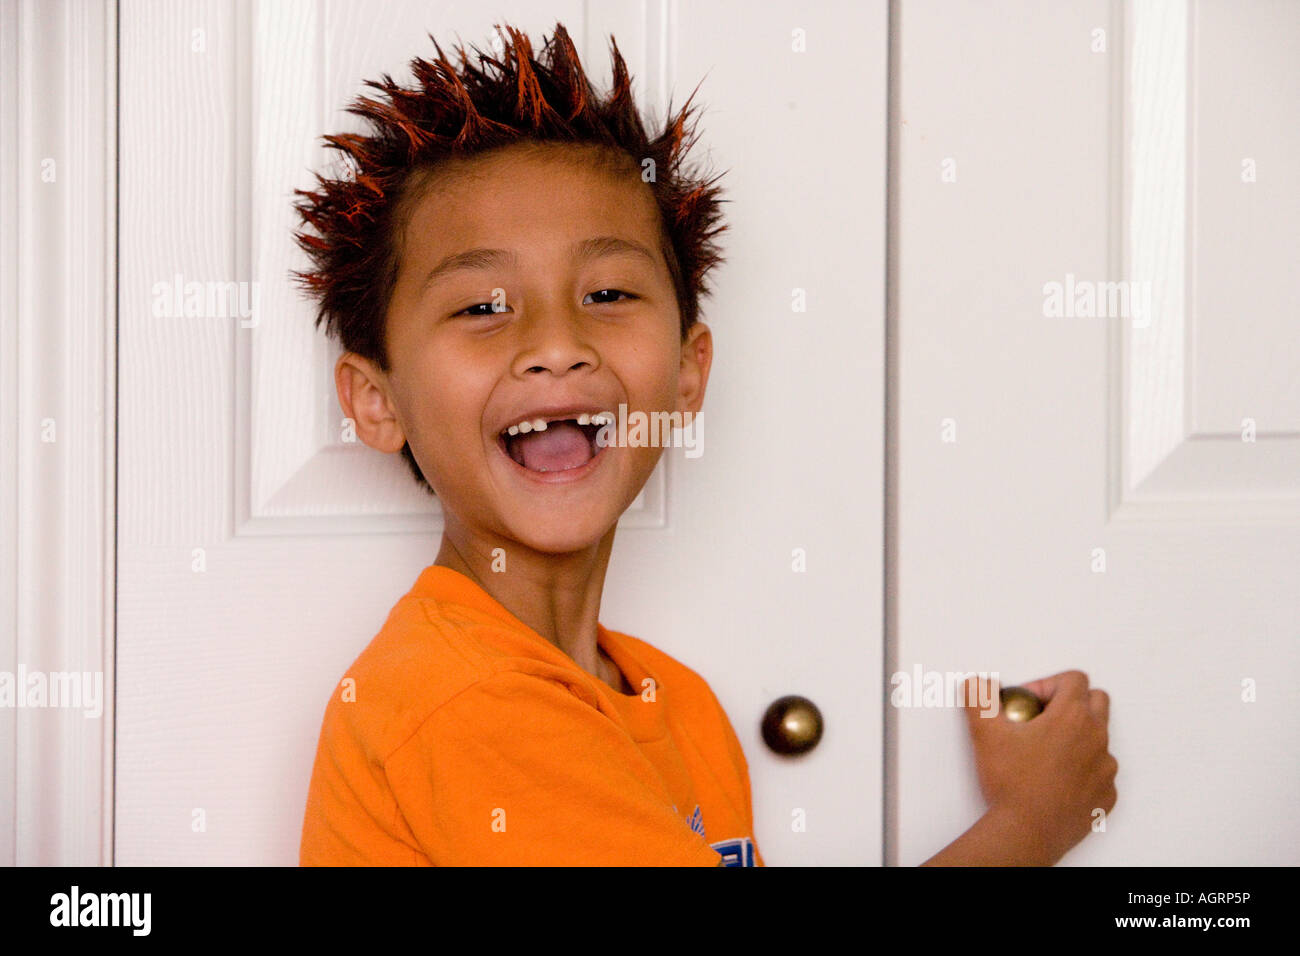 Young Asian boy with spiked hair Stock Photo - Alamy